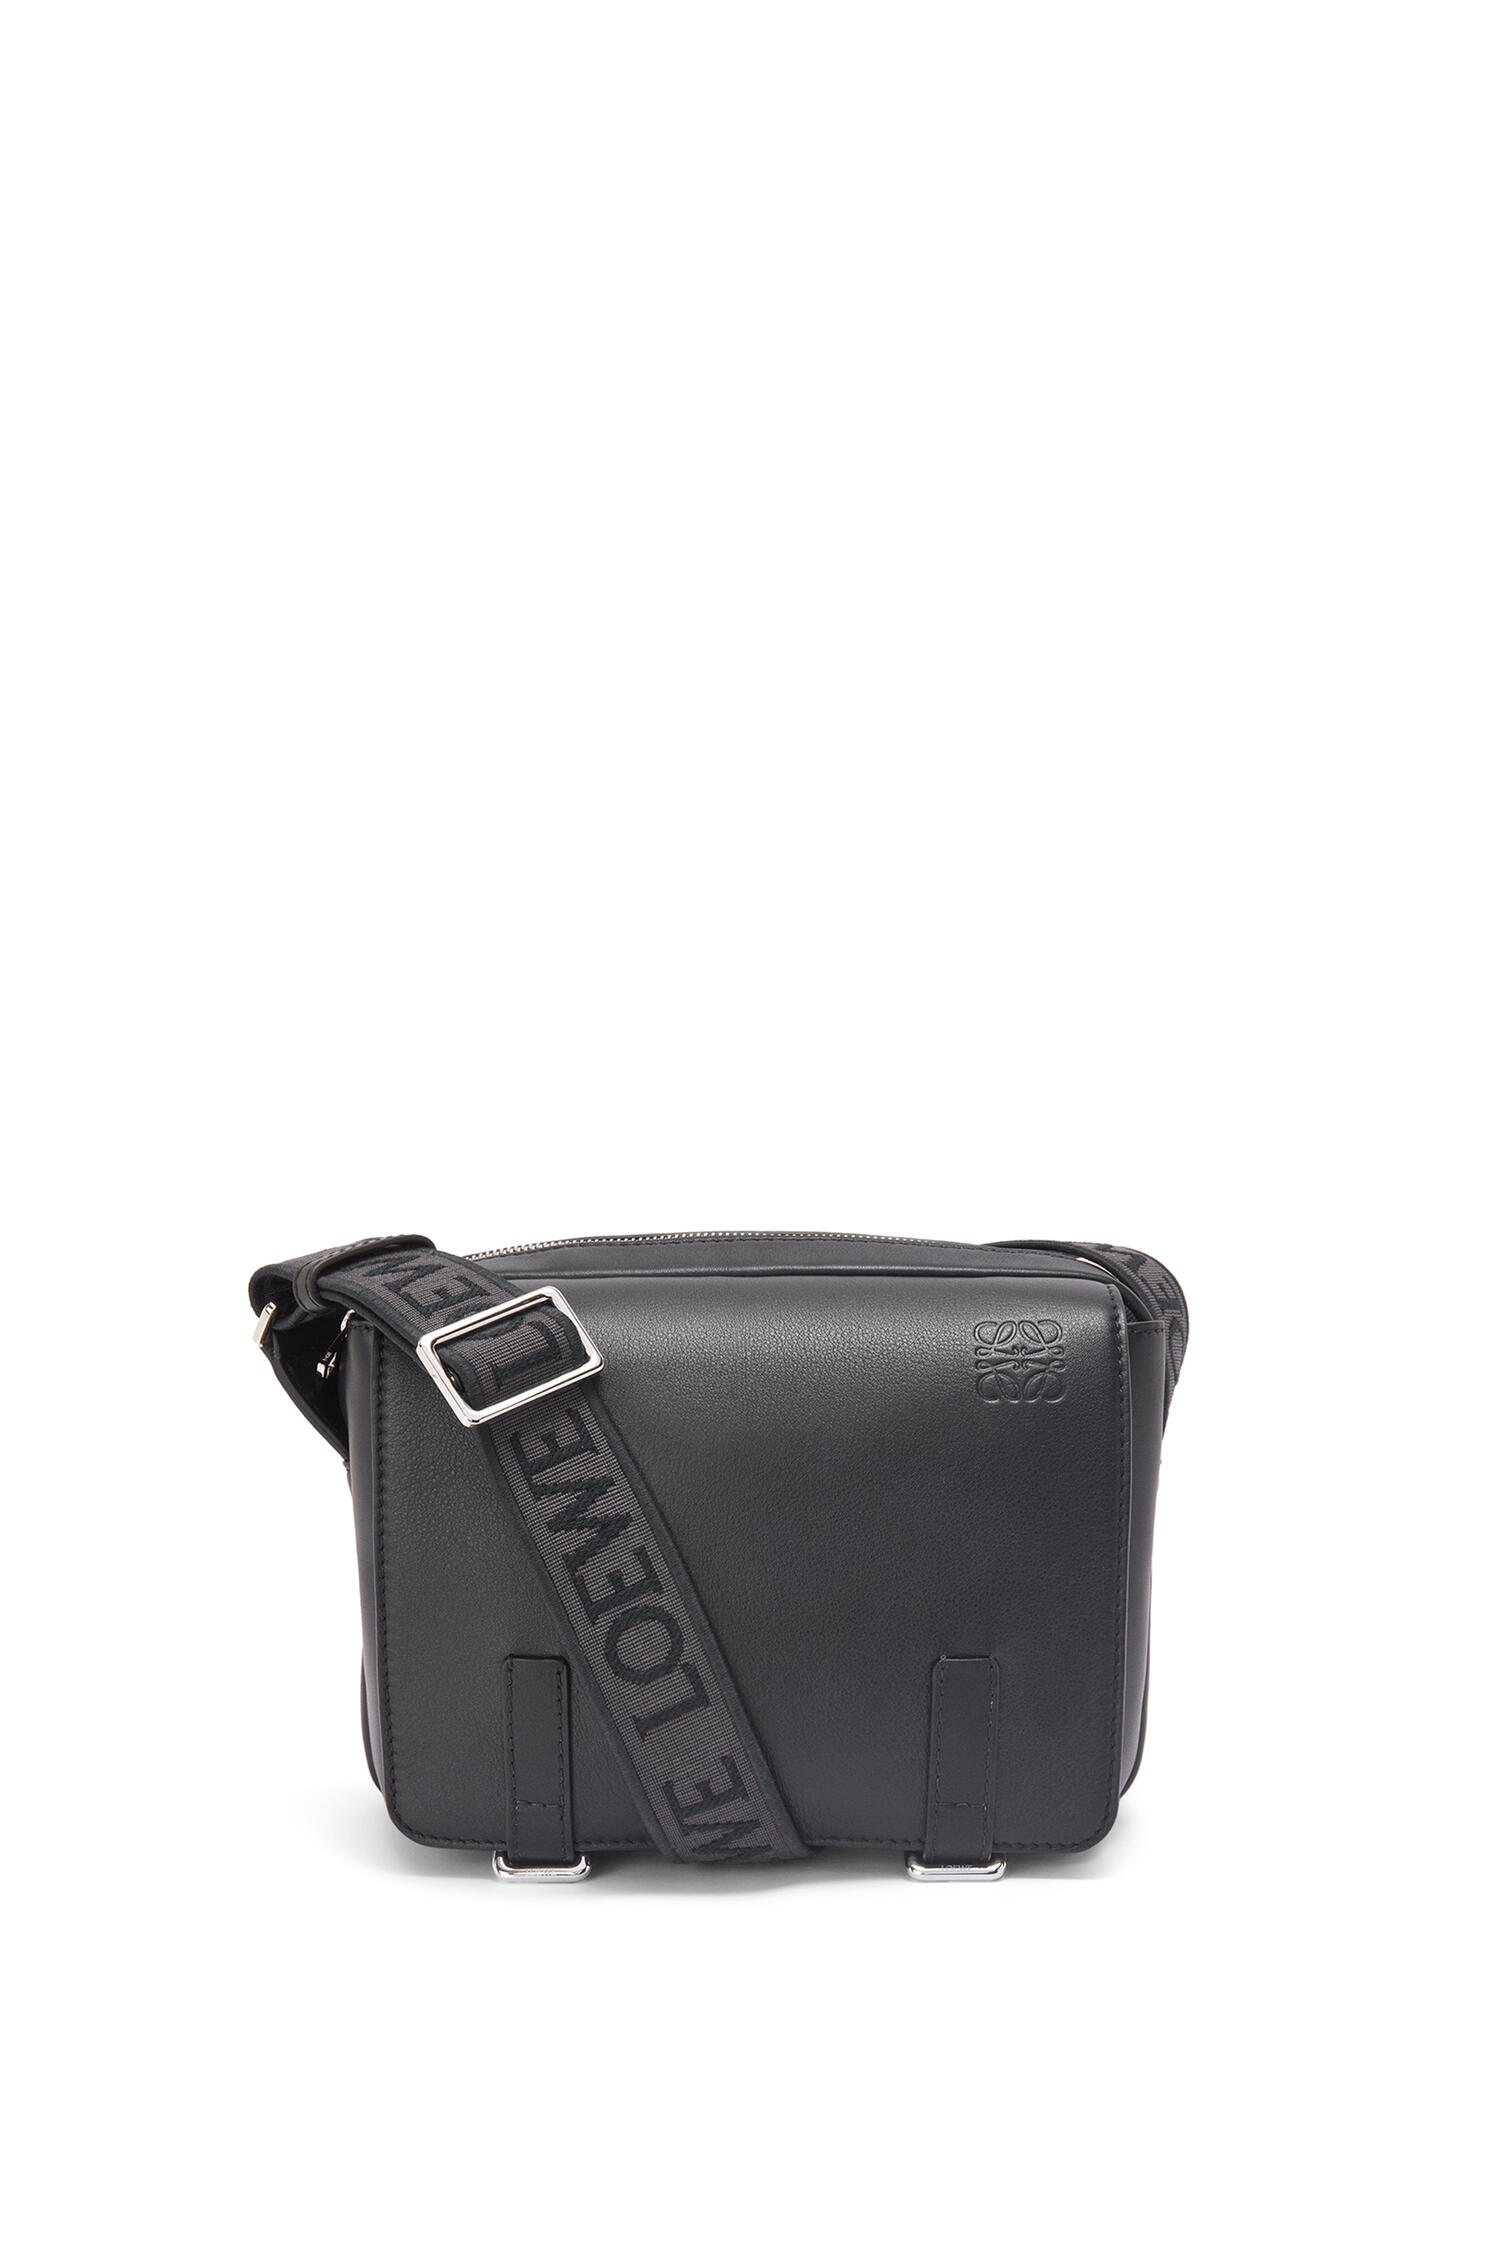 XS Military messenger bag in supple smooth calfskin and jacquard Black ...